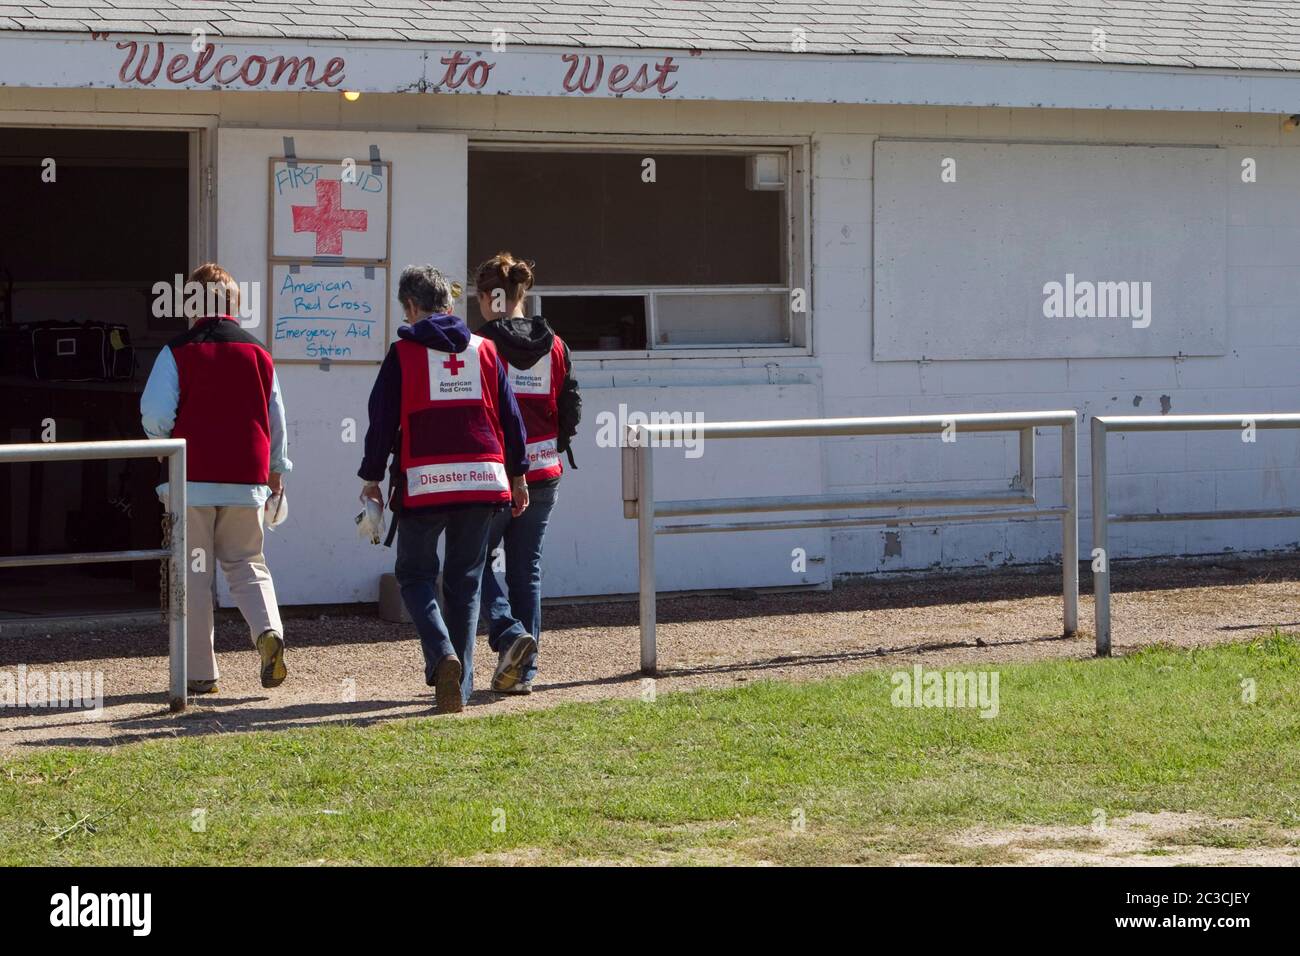 West, Texas USA, April 19 2013: Volunteers with the Red Cross arrive to  to provide food, water, emotional support, and health services to those affected by the April 17 explosion at a fertilizer plant in West that killed 14 and damaged or destroyed hundreds of buildings ©Marjorie Kamys Cotera/Daemmrich Photography Stock Photo